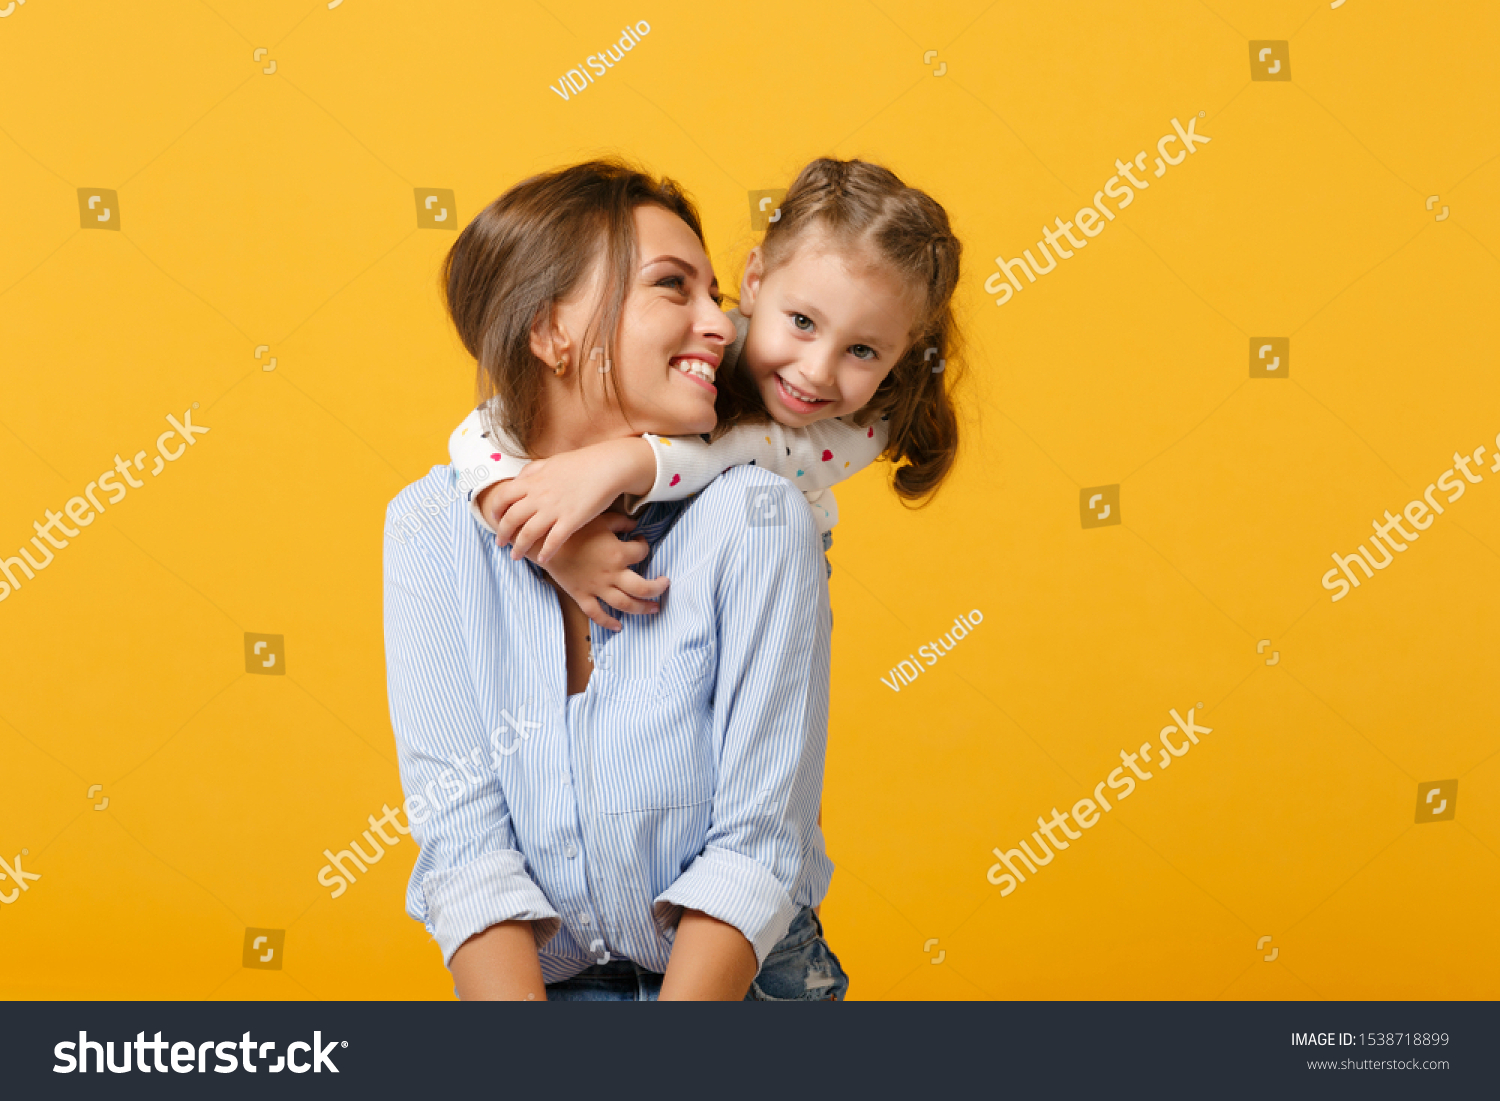 Woman in light clothes have fun with cute child baby girl 4-5 years old. Mommy little kid daughter isolated on yellow background studio portrait. Mother's Day love family parenthood childhood concept #1538718899